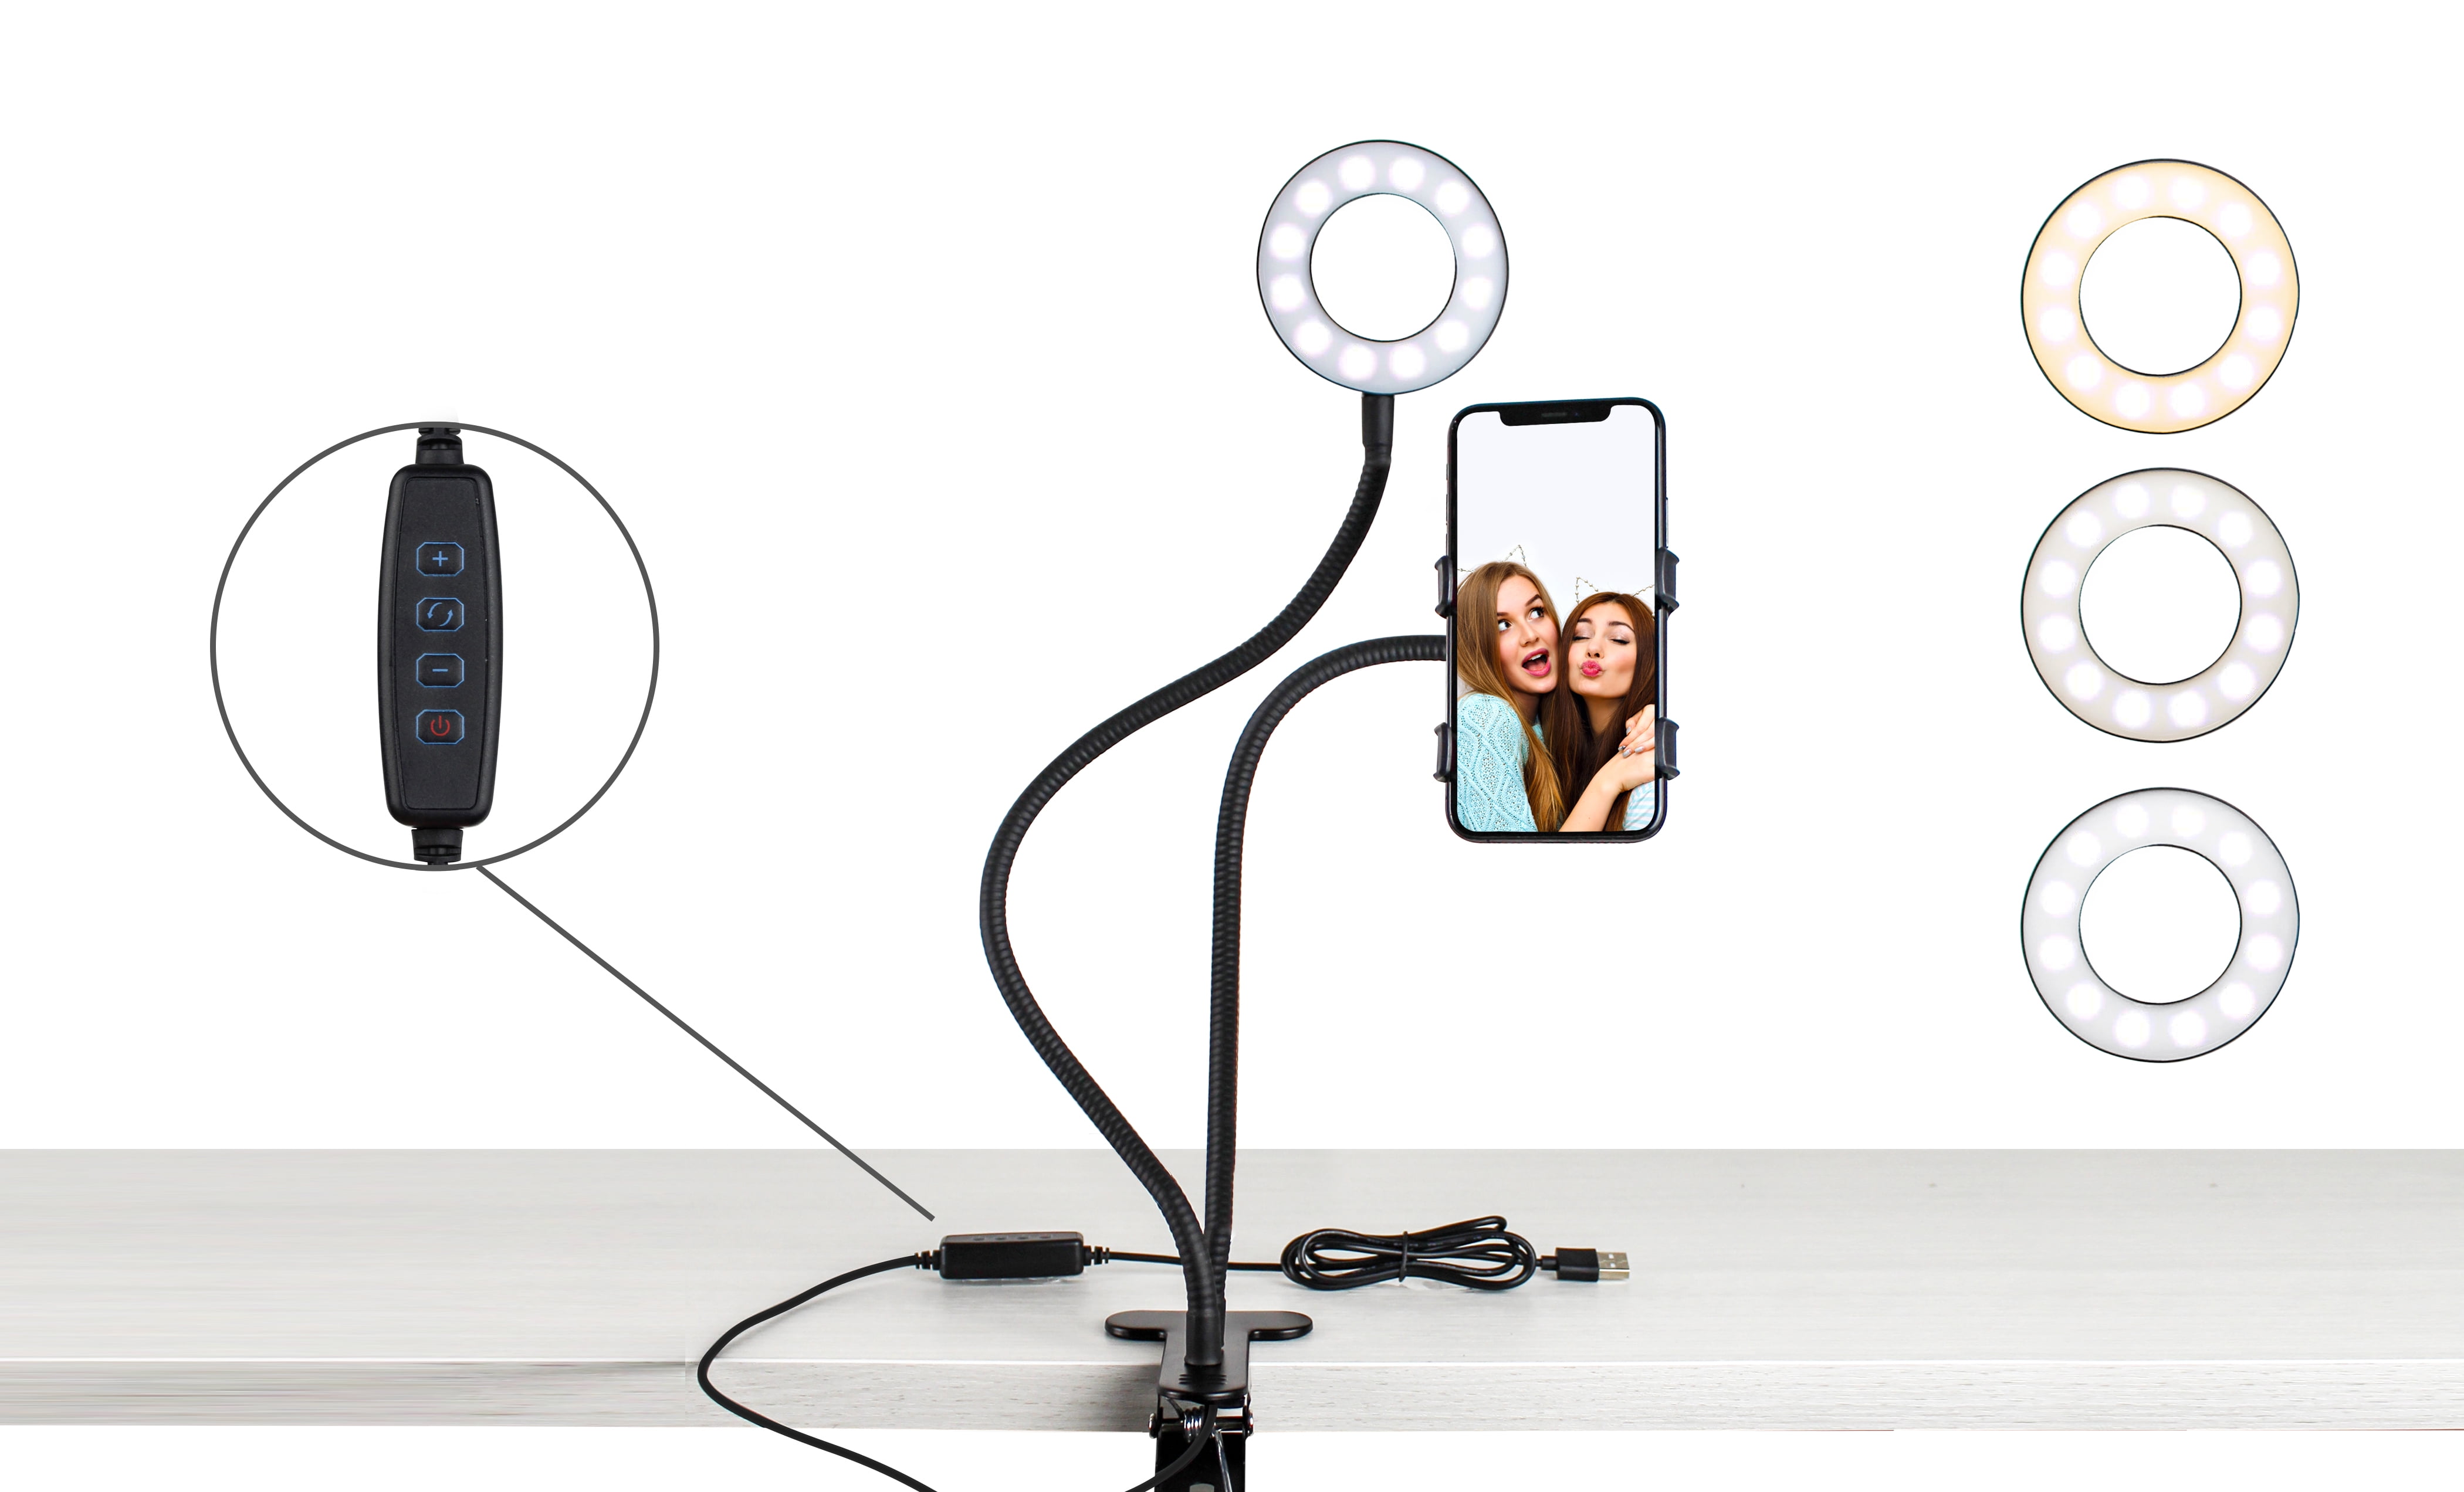 Clip-On Selfie Ring Light For Phones (USB Charging) - 4Customize